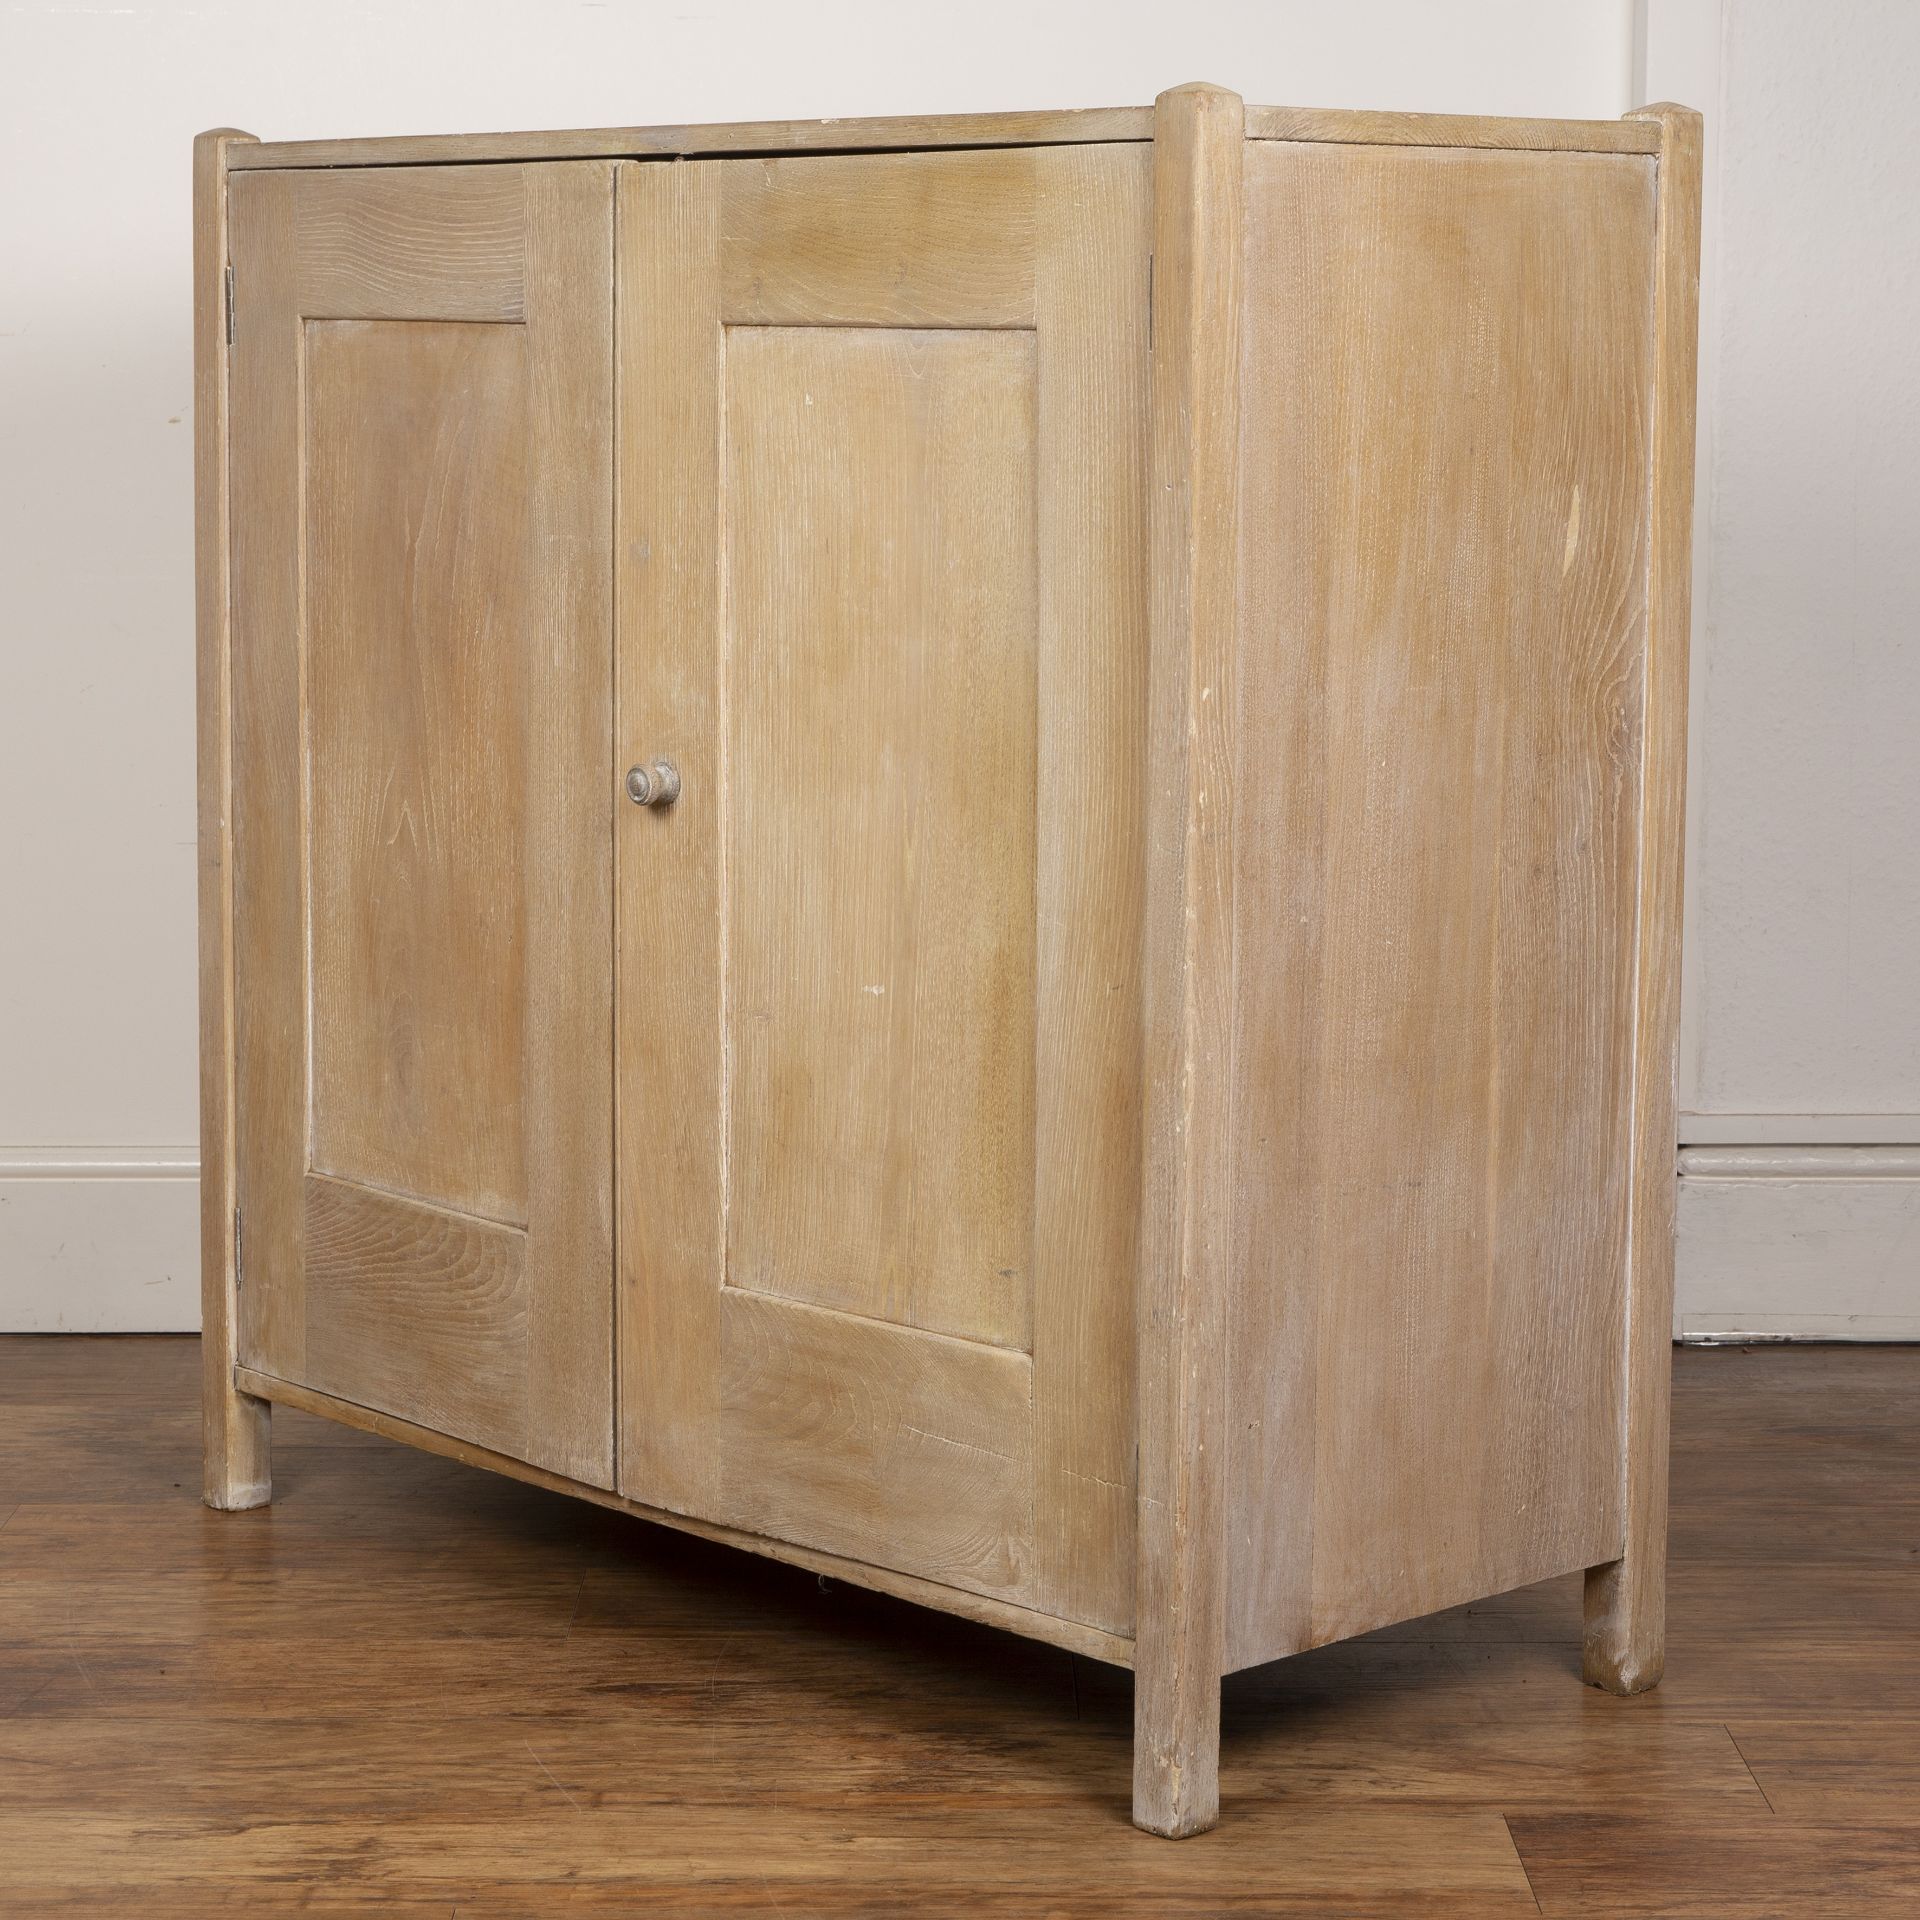 Heals cupboard limed oak, design number '348', with two panelled doors enclosing shelves, raised - Image 4 of 5